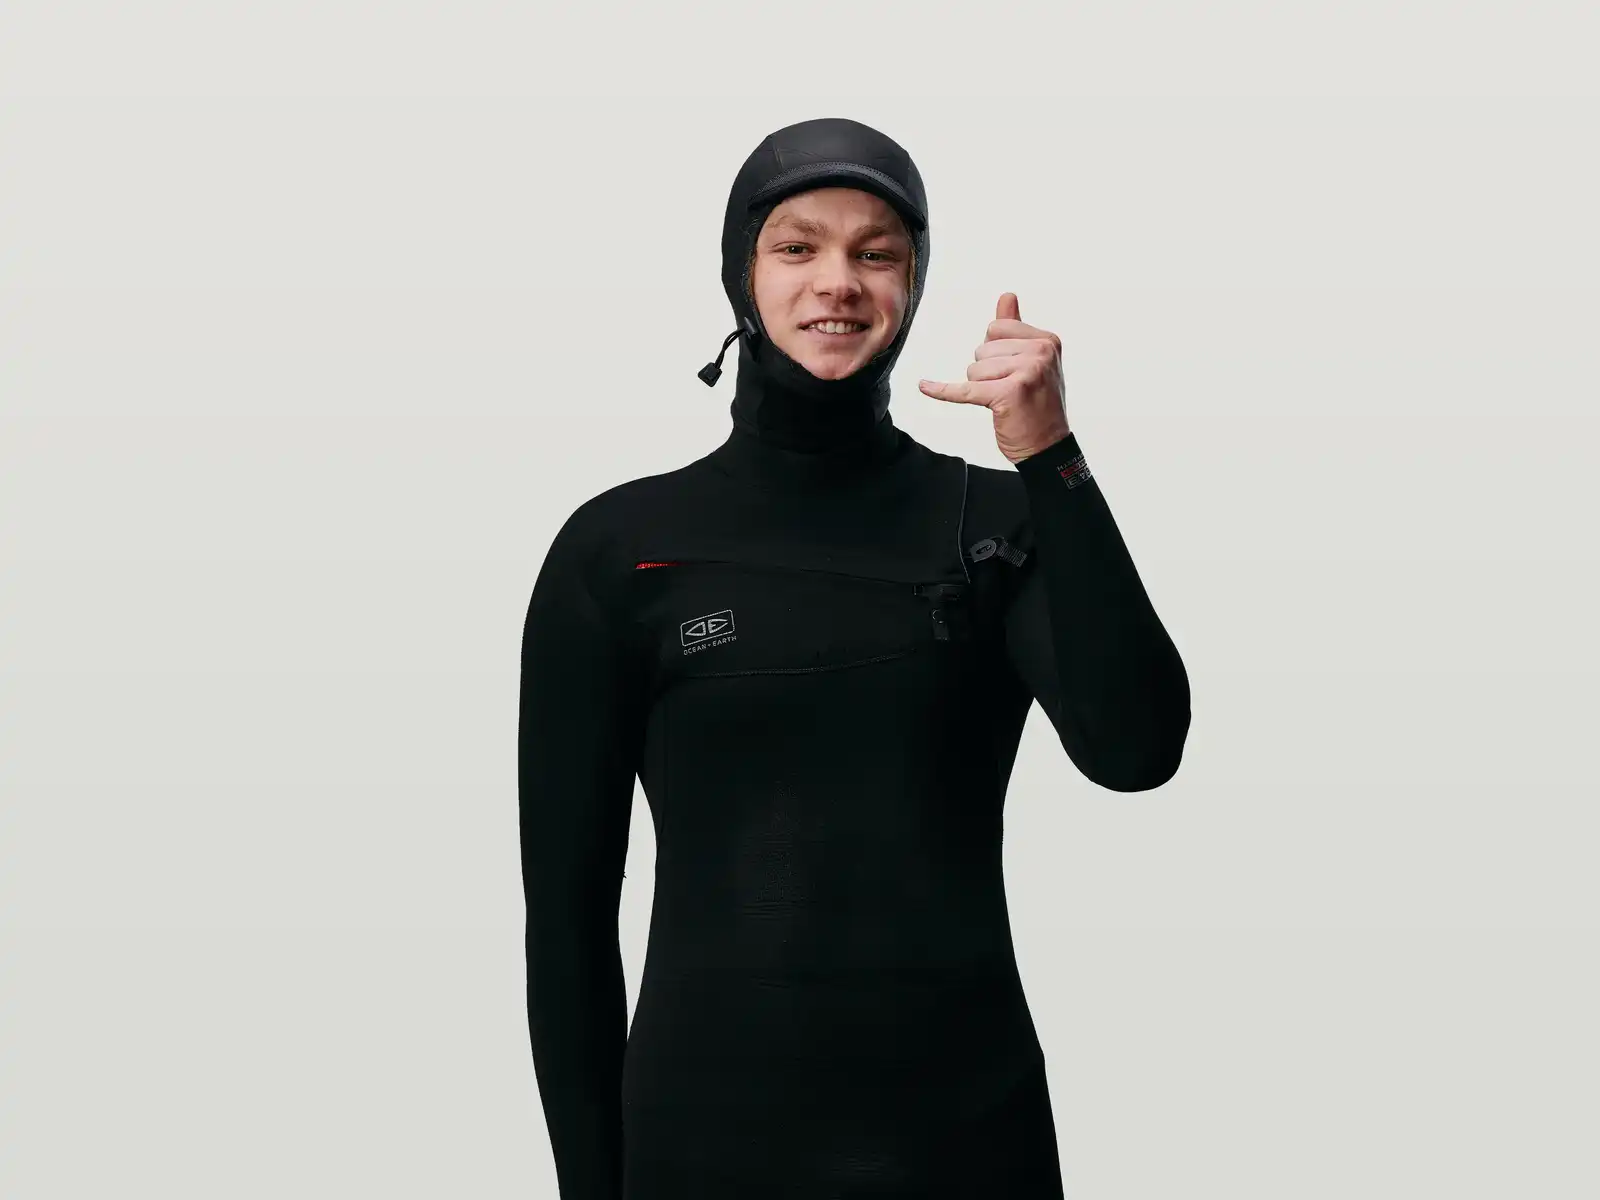 Awa in a wetsuit smiling doing a shaka hand sign